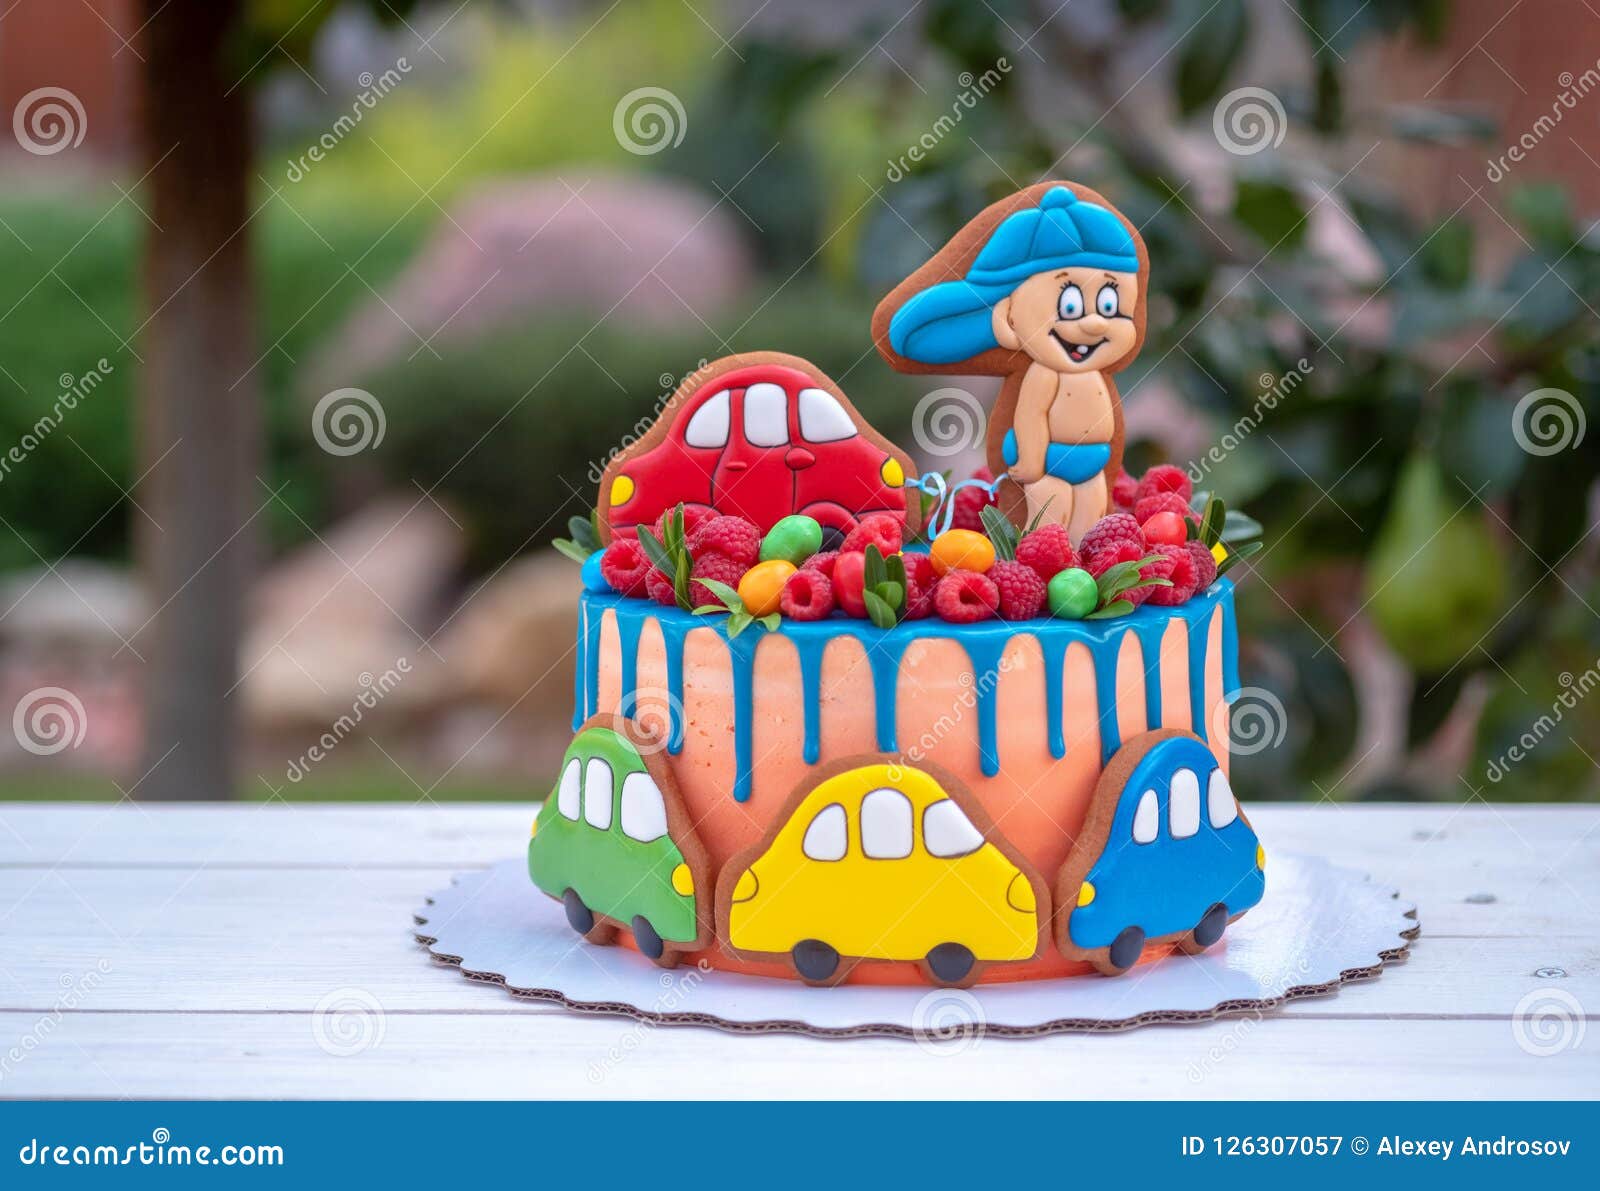 Funny Cake for Kids with Colorful Toy Cars Stock Image - Image of ...